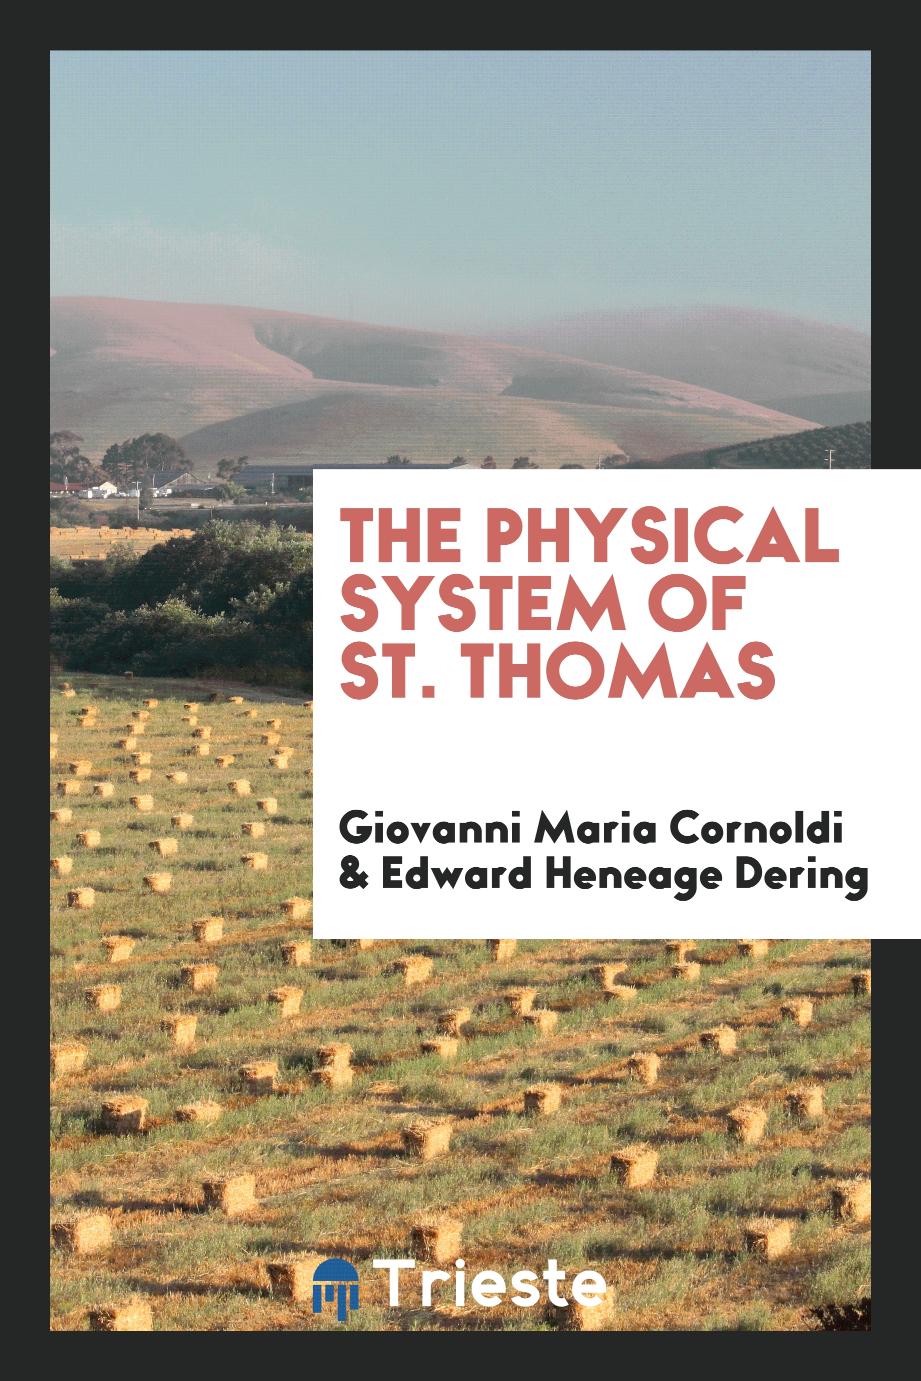 The physical system of St. Thomas